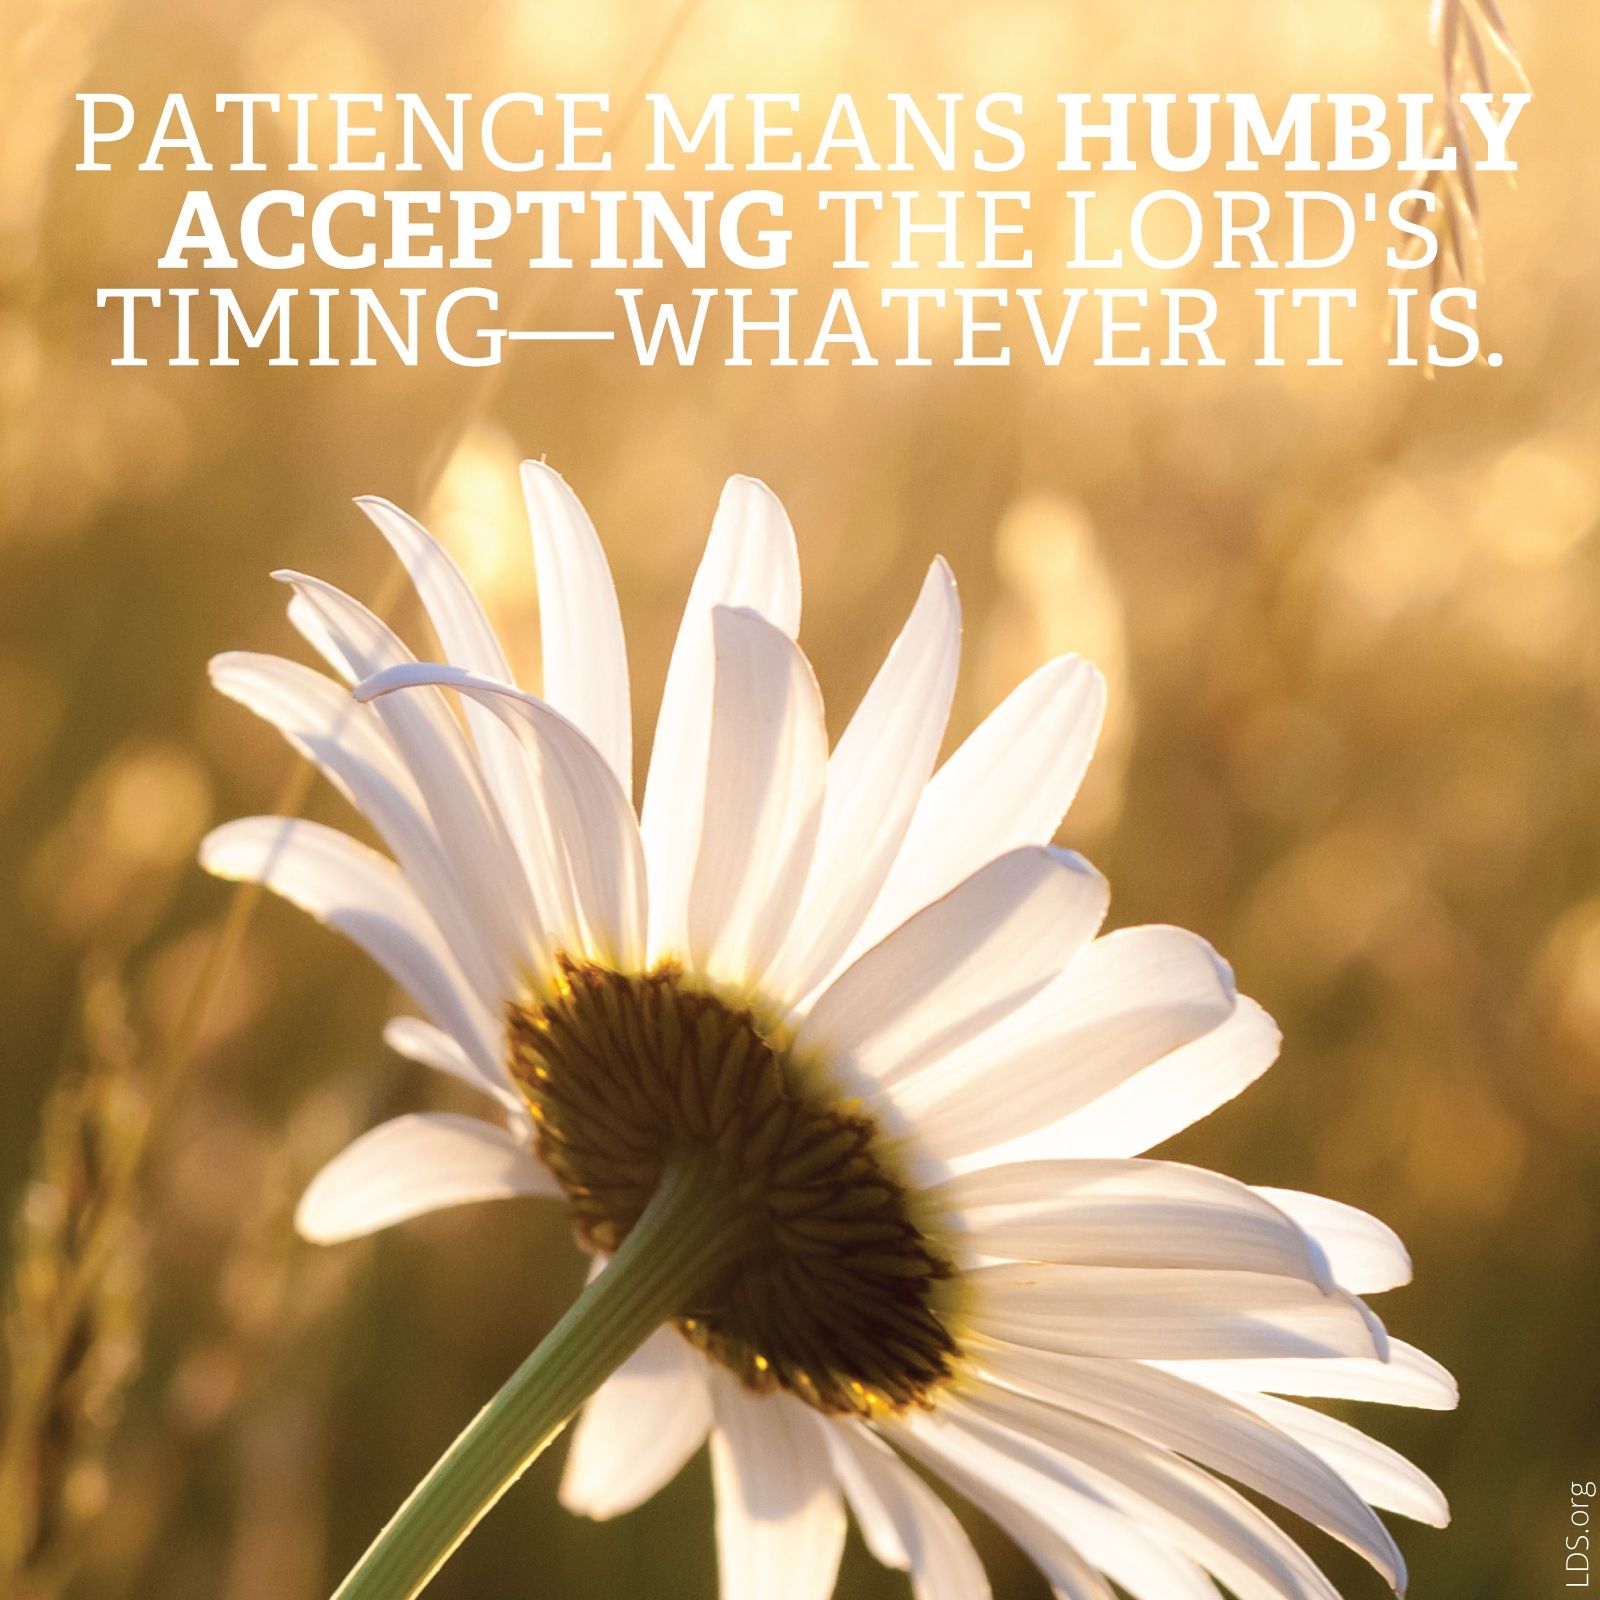 “Patience means humbly accepting the Lord’s timing—whatever it is.”—Sarah Jenkins, “Trust, Patience, and Endurance: My Lessons from Infertility” © See Individual Images ipCode 1.